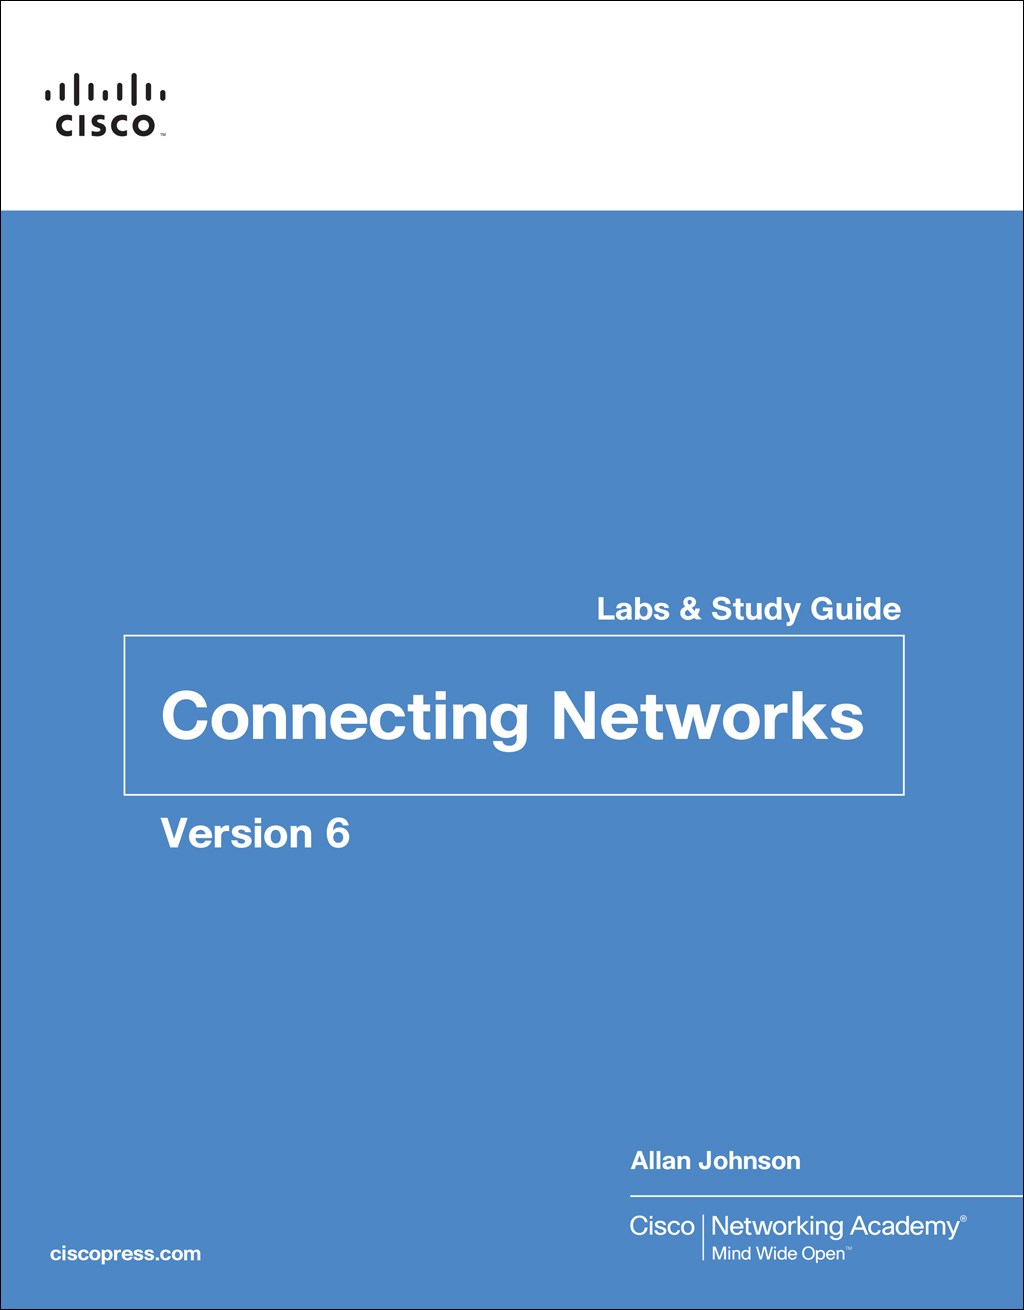 Connecting Networks v6 Labs & Study Guide